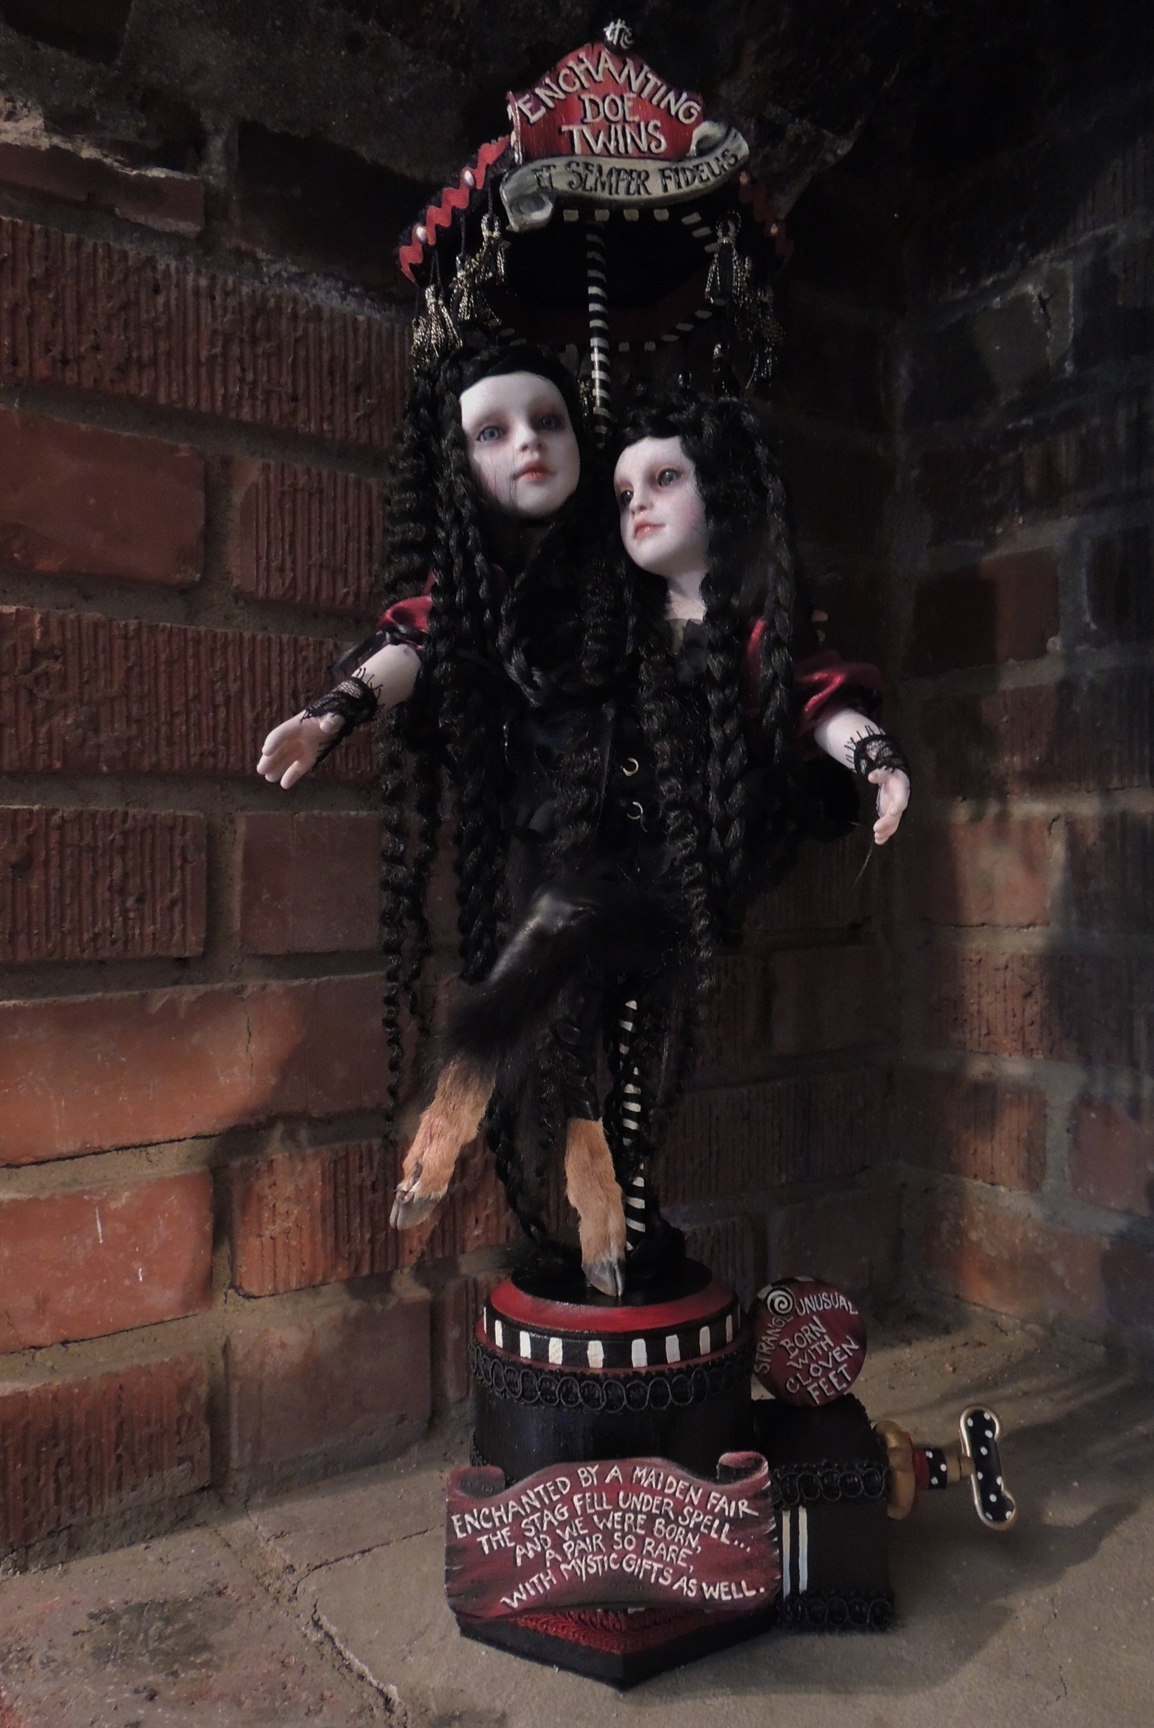 gothic conjoined twin artdolls with long crimped black hair and taxidermied deer doe feet on a pedestal music box with hand-painted signs